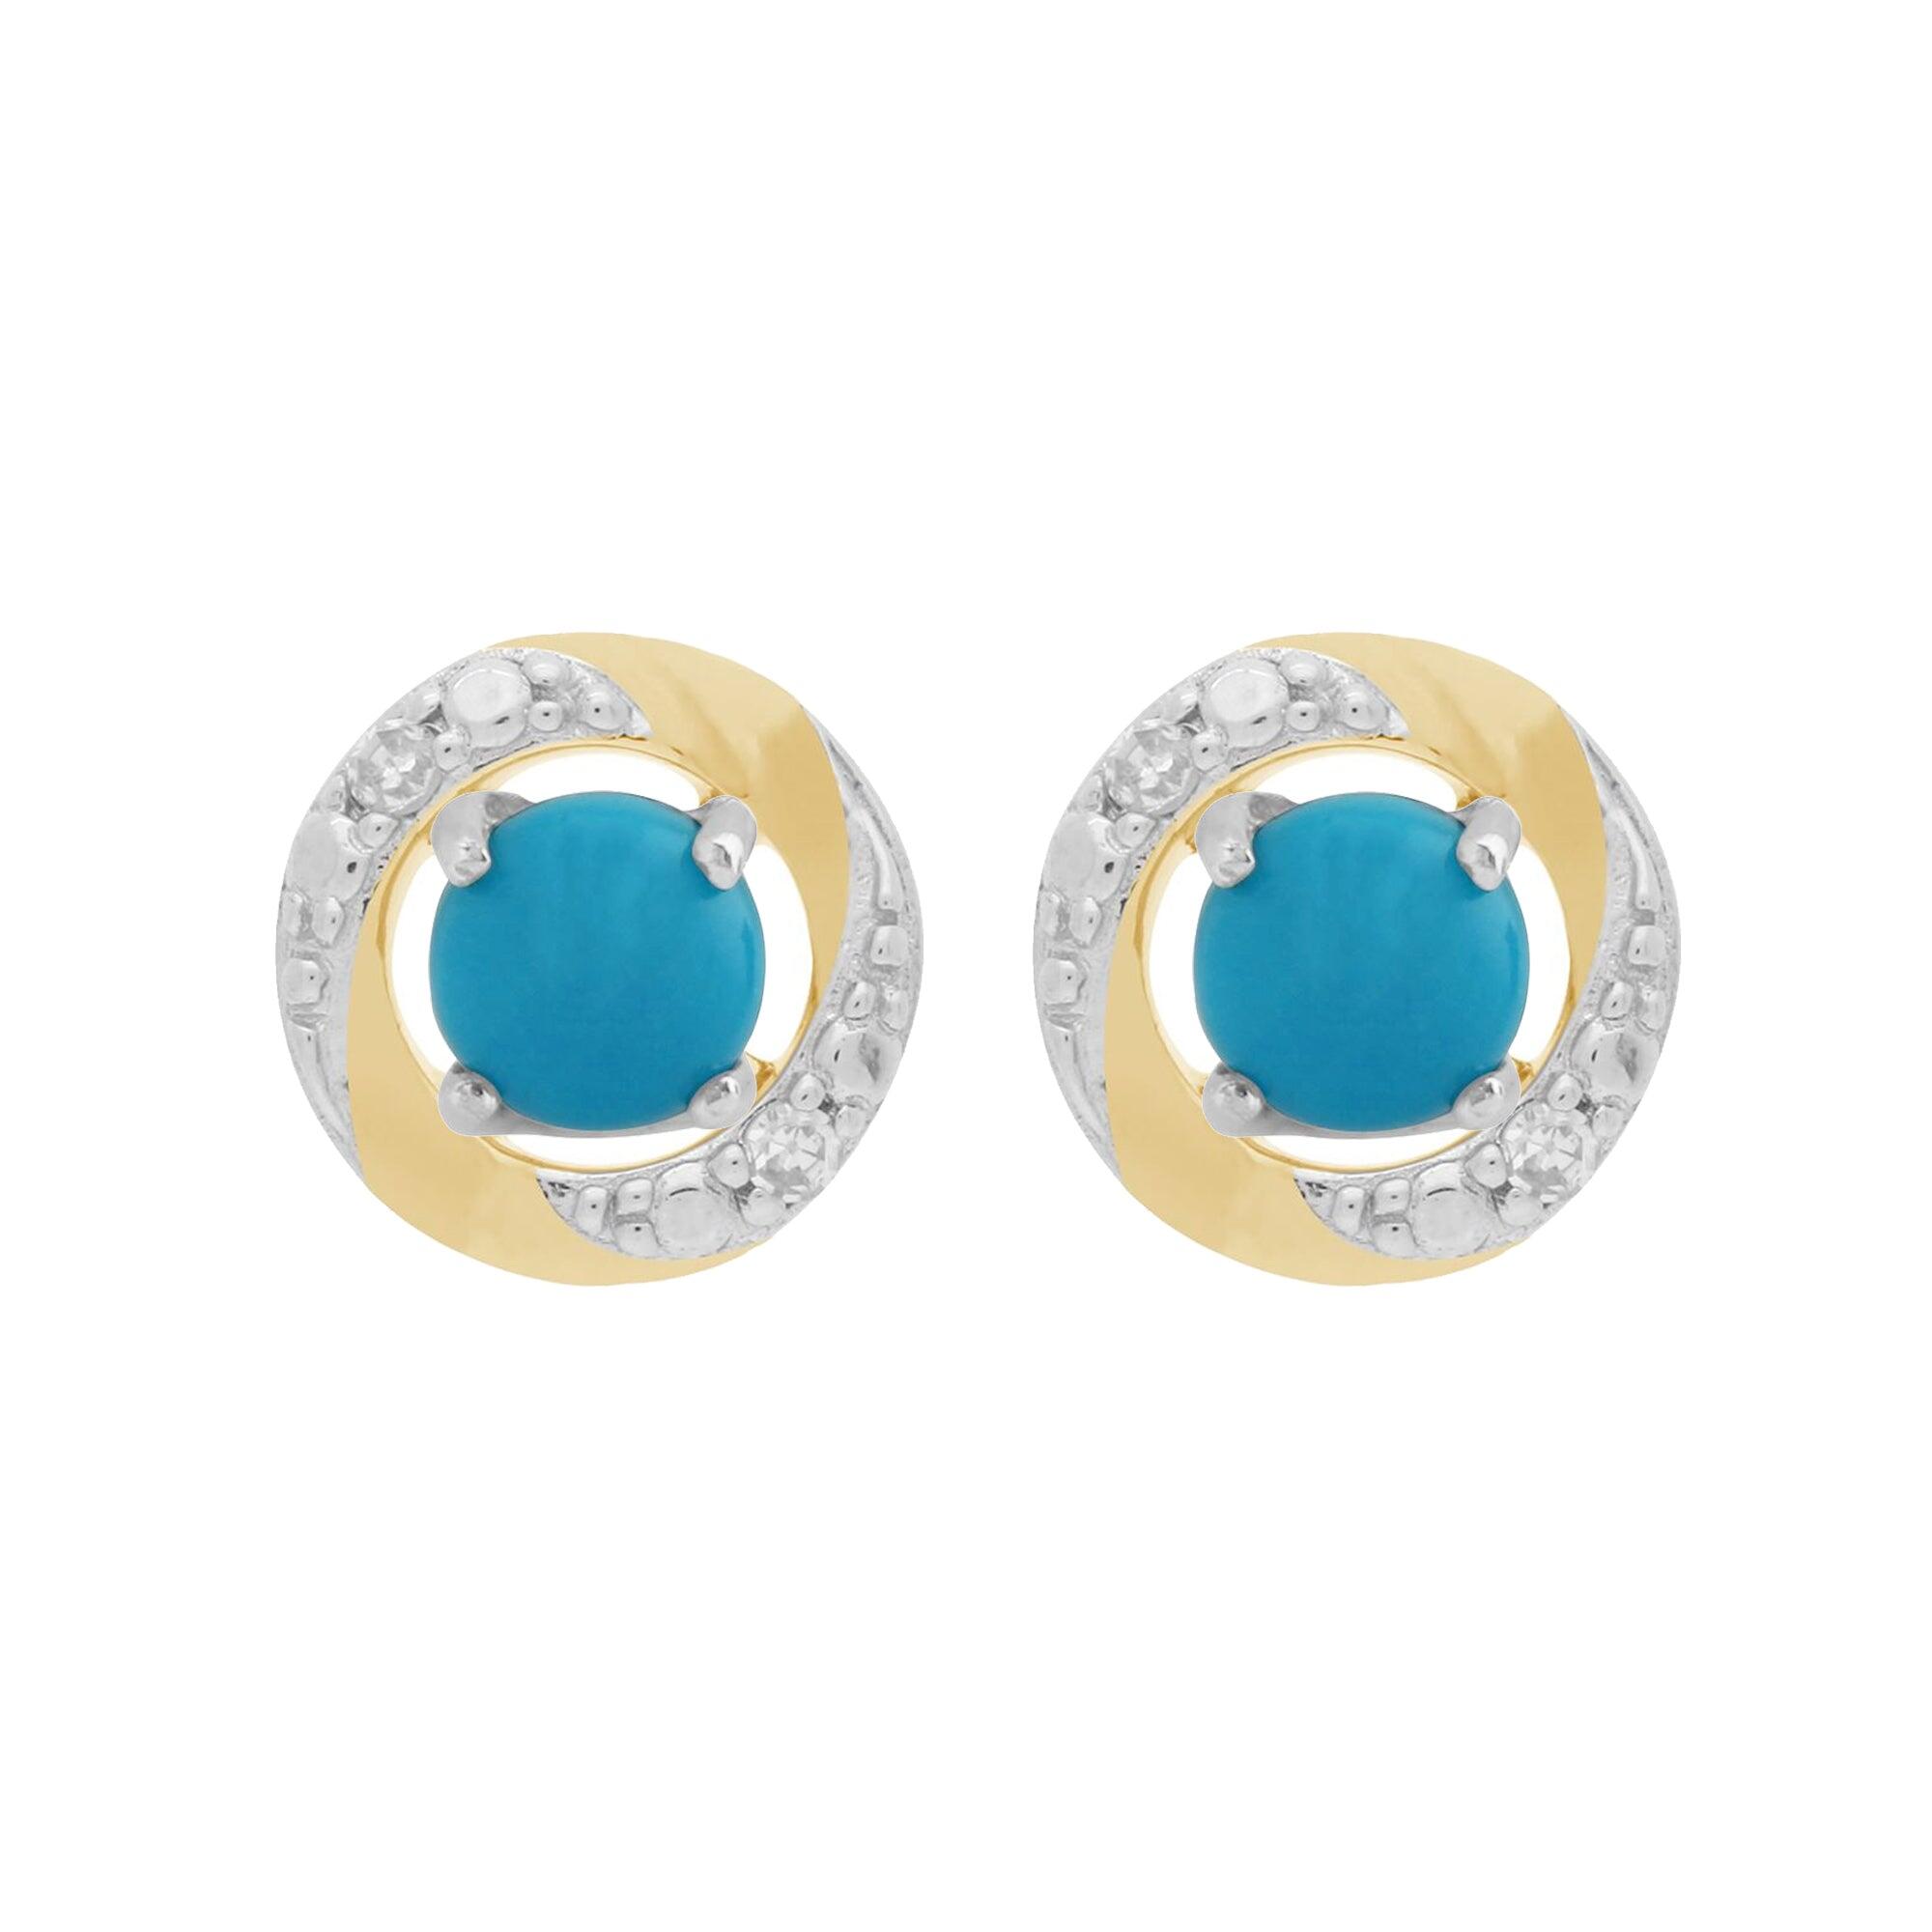 9ct White Gold Turquoise Stud Earrings with Detachable Diamond Halo Ear Jacket in 9ct Yellow Gold